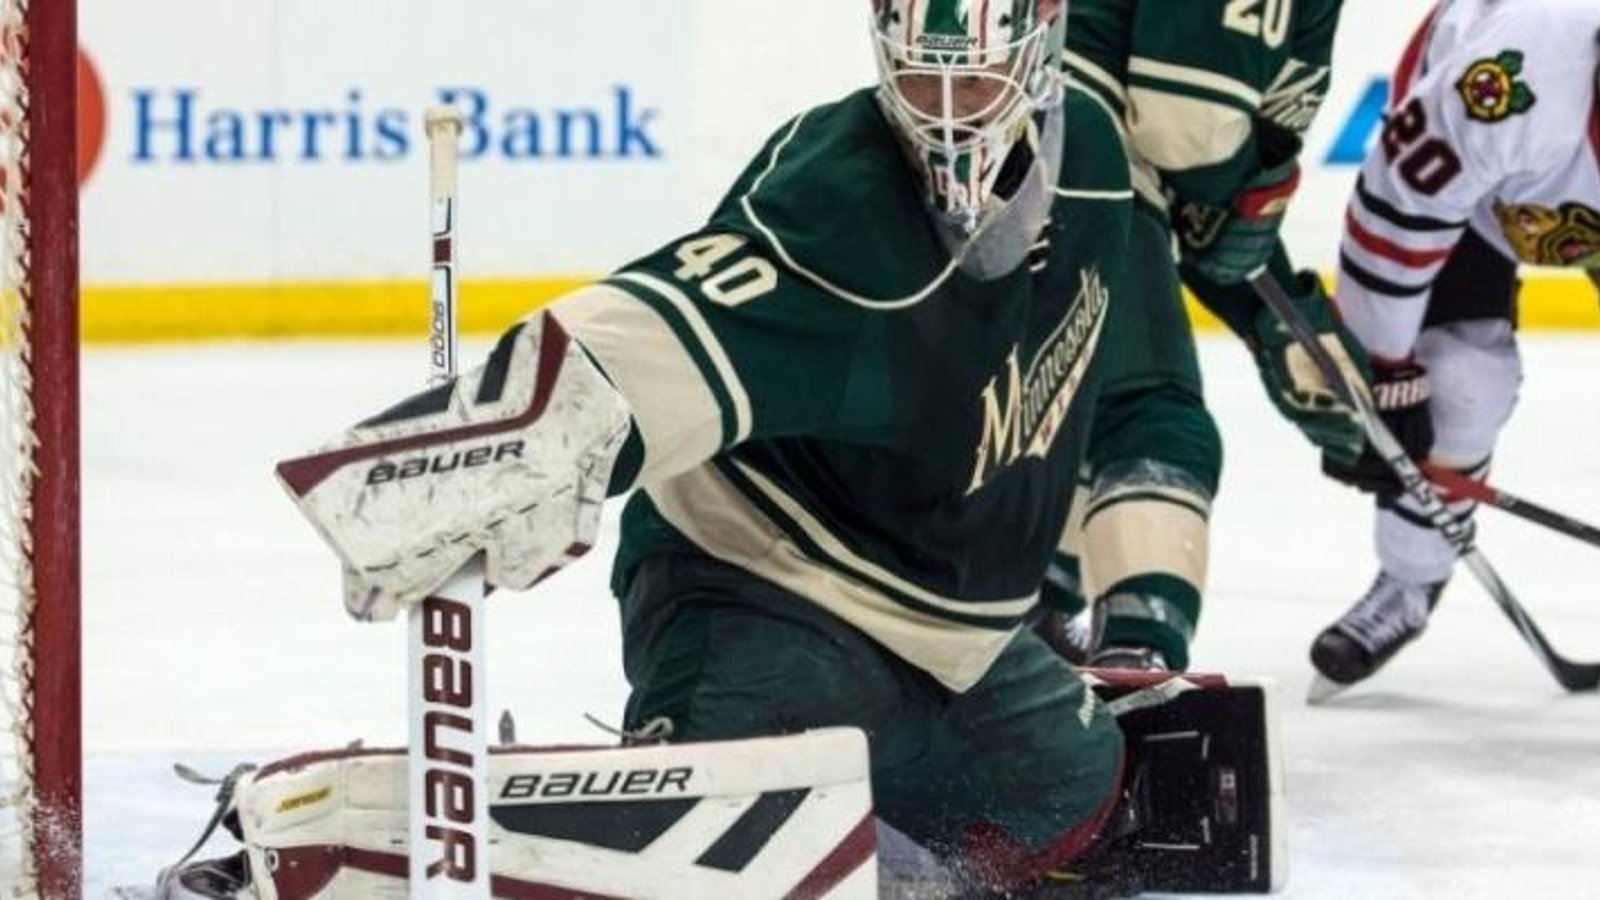 The Devan Dubnyk Trade: One Year Later